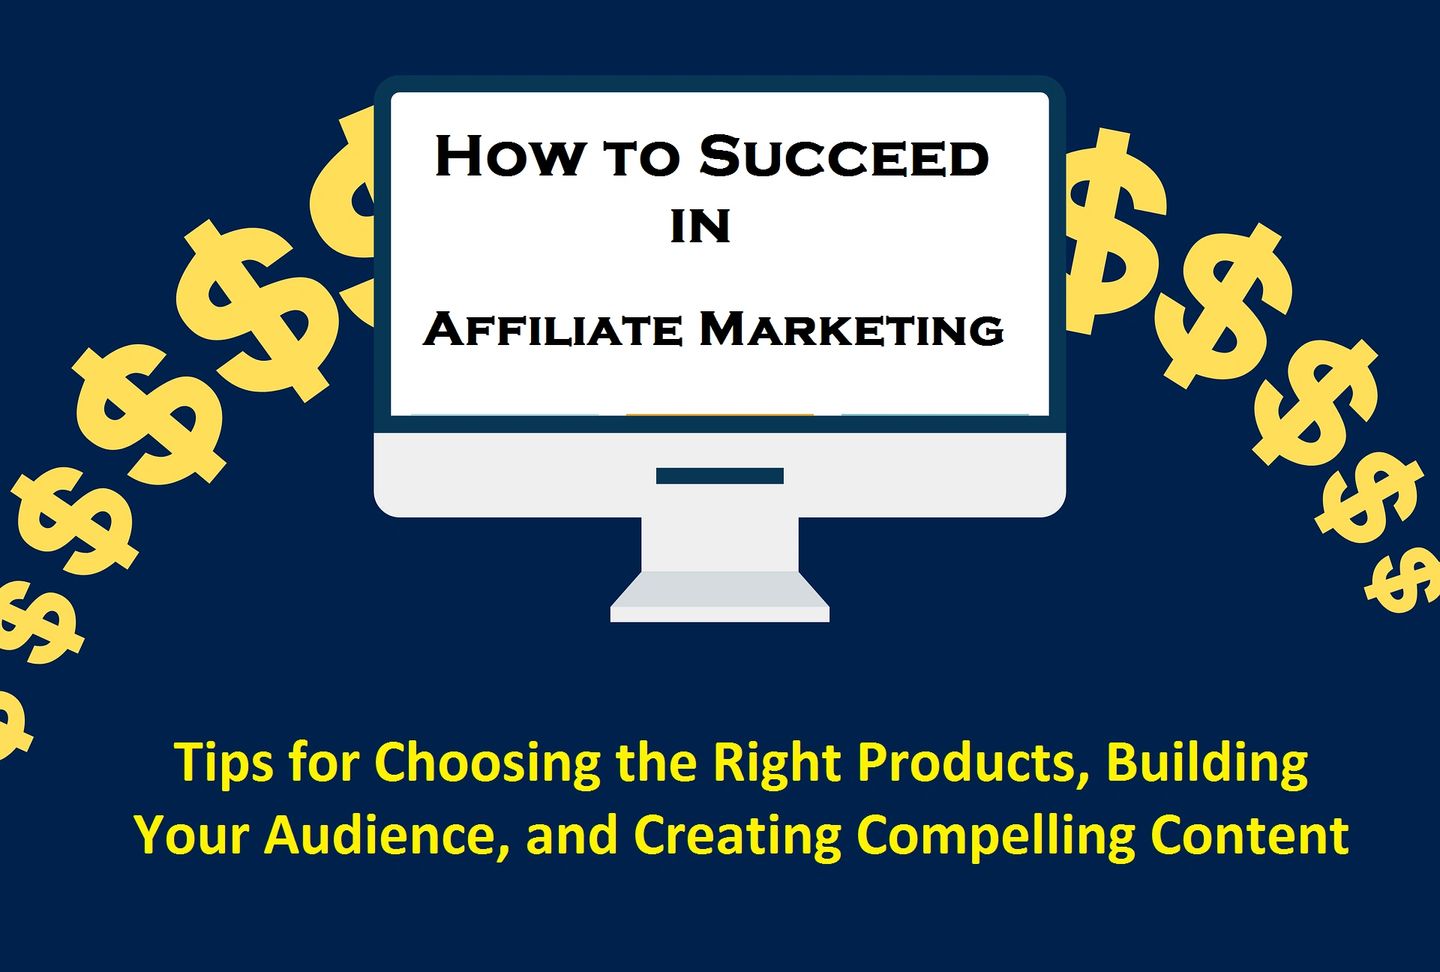 How to Succeed in Affiliate Marketing: Tips for Choosing the Right Products, Building Your Audience, and Creating Compelling Content